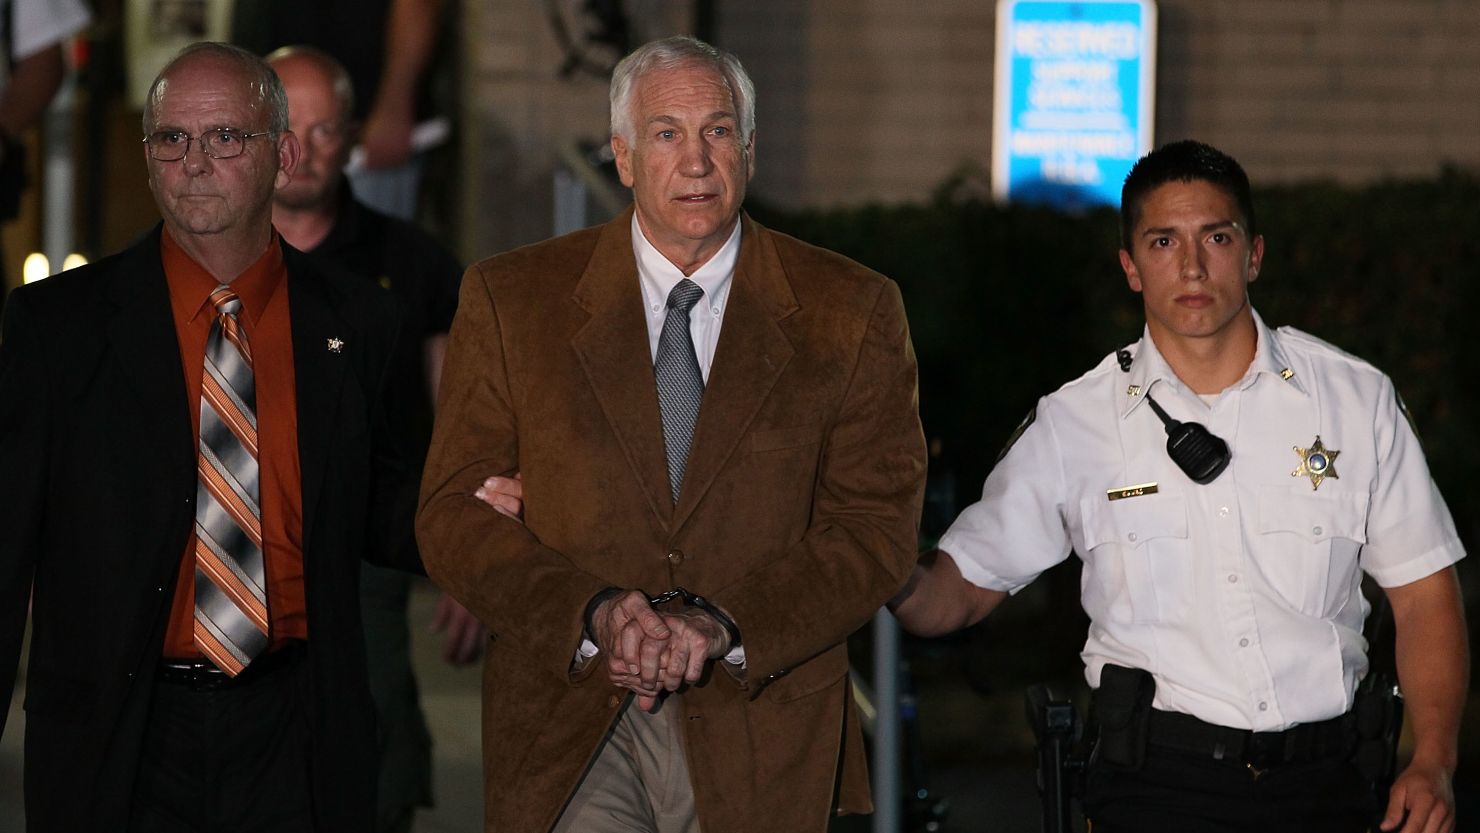 Jerry Sandusky leaves court in handcuffs after being convicted in his child sex abuse trial in Bellefonte, Pennsylvania. 